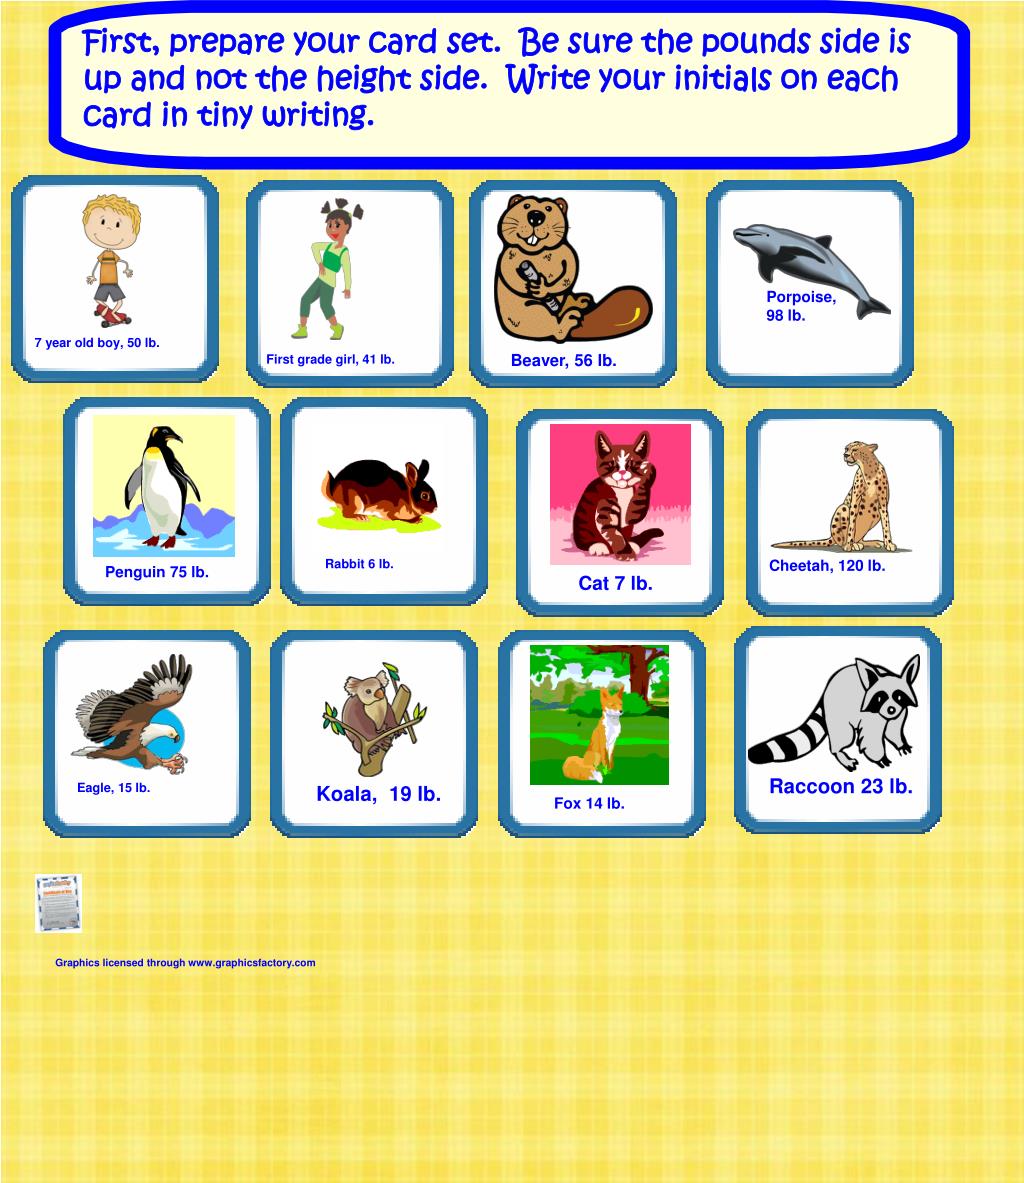 PPT - Animal Weights Cards Grade One Everyday Math Unit 5 PowerPoint ...